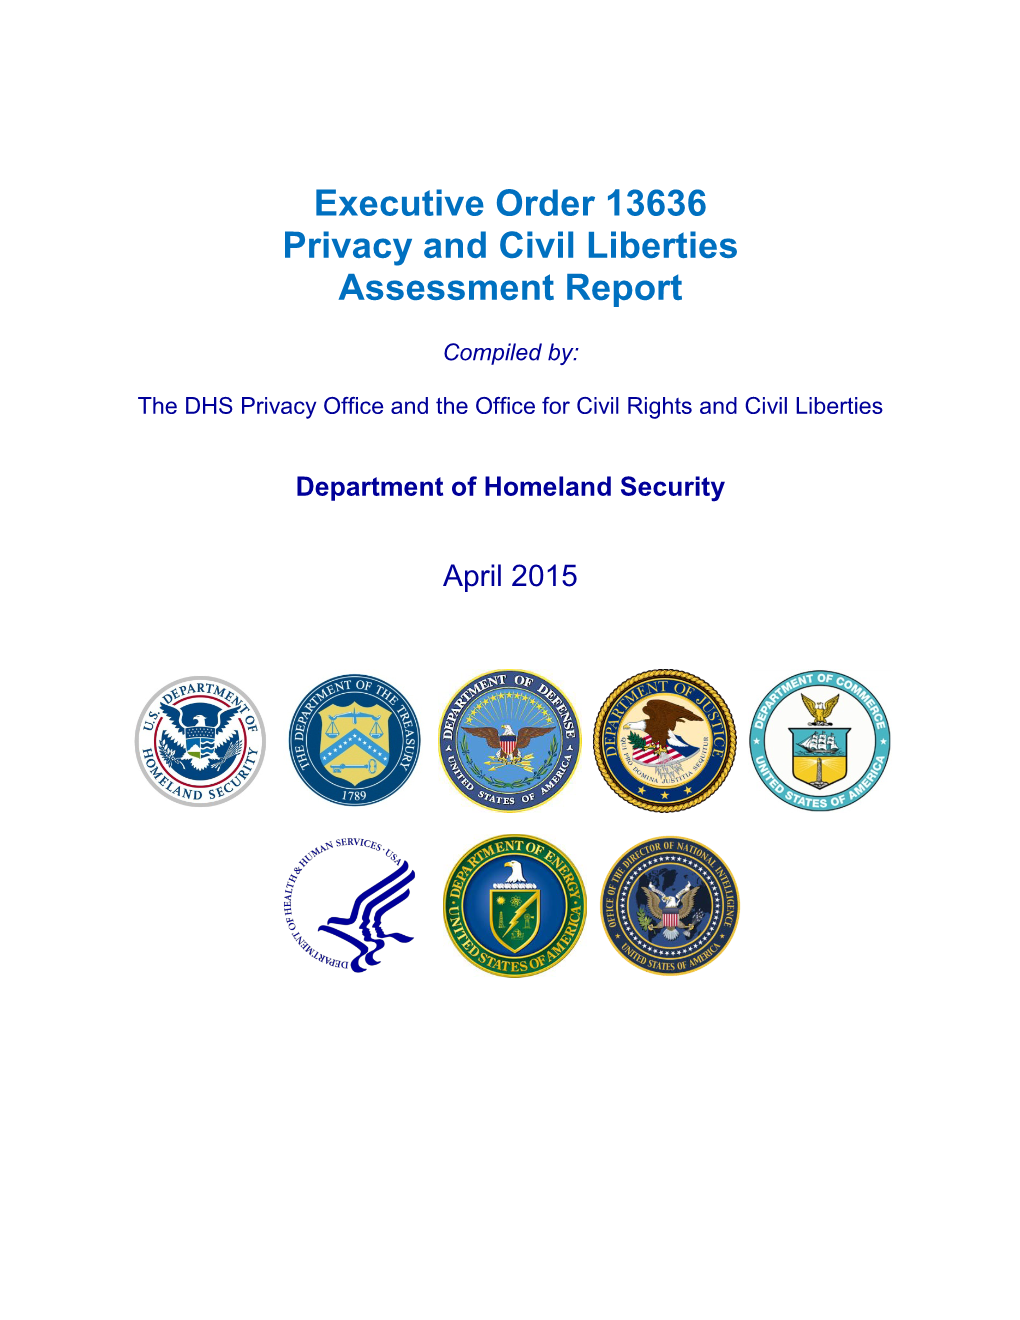 2015 Executive Order 13636 Privacy and Civil Liberties Assessment Report